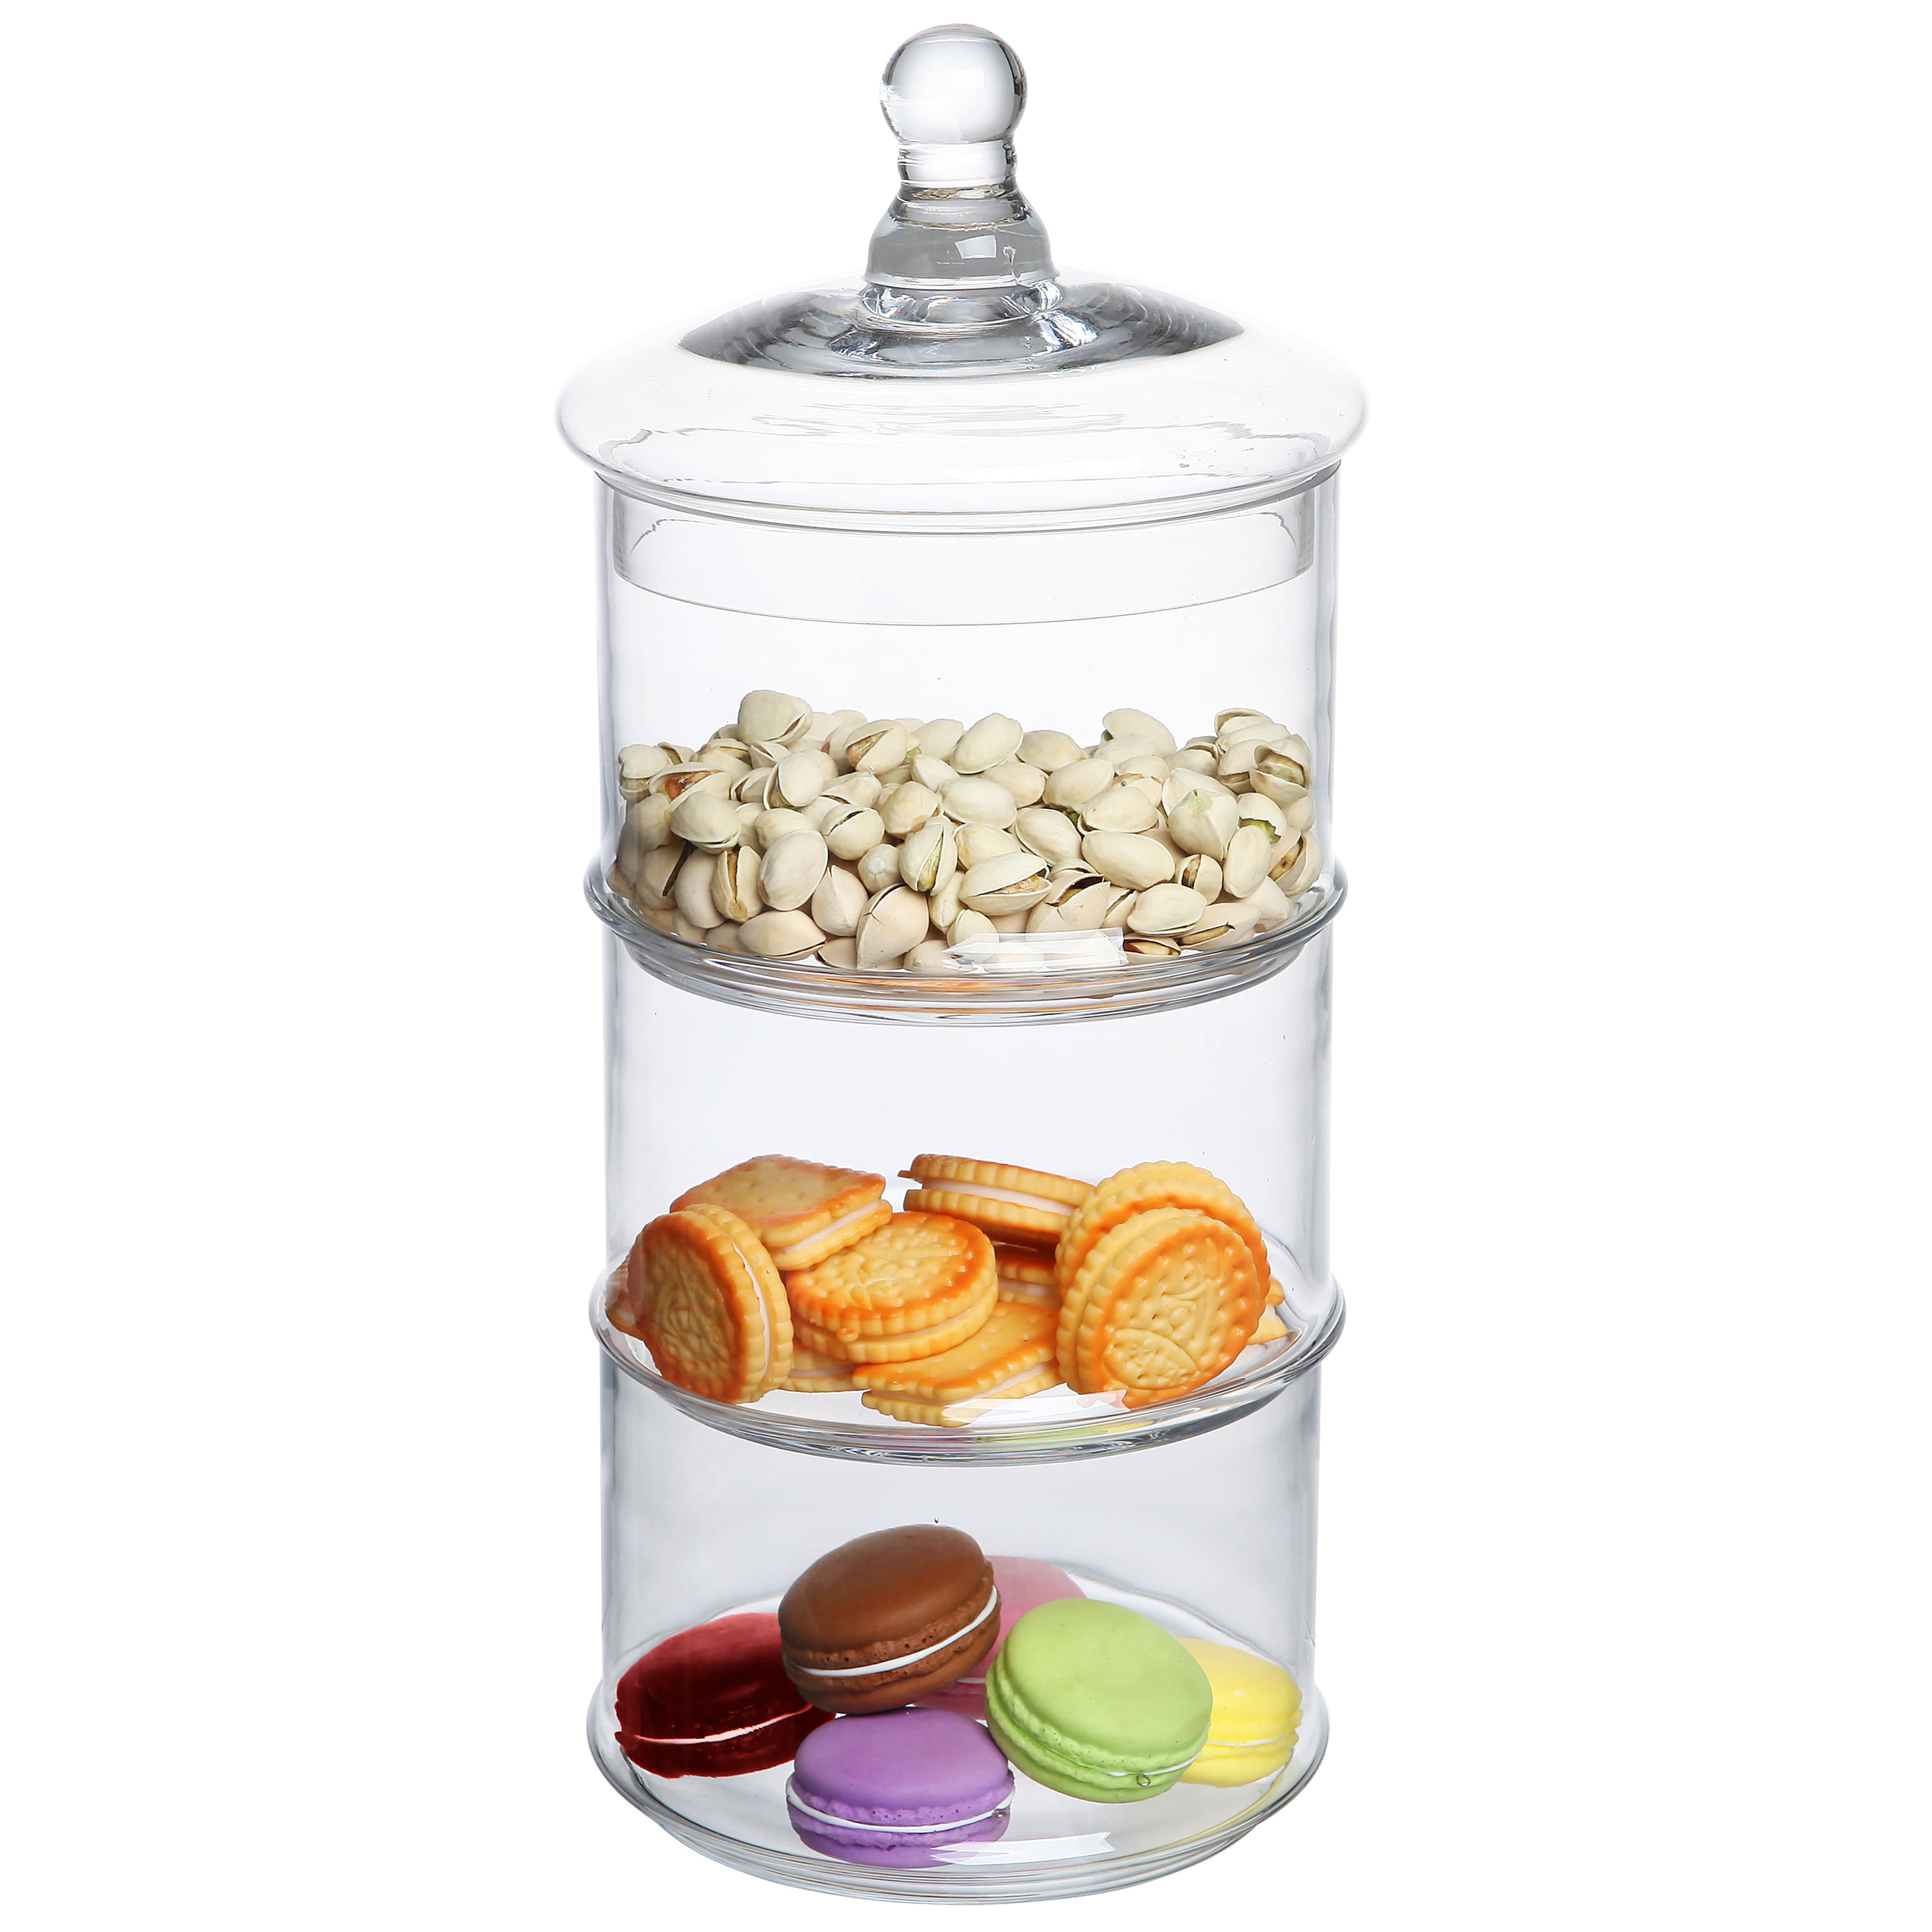 Small 3 Tier/Level Stackable Round Glass Storage Container/Canister/Organizer/Apothecary Jar Set with Lid - Nice for Snack/Candy/Cookie Display or Kit